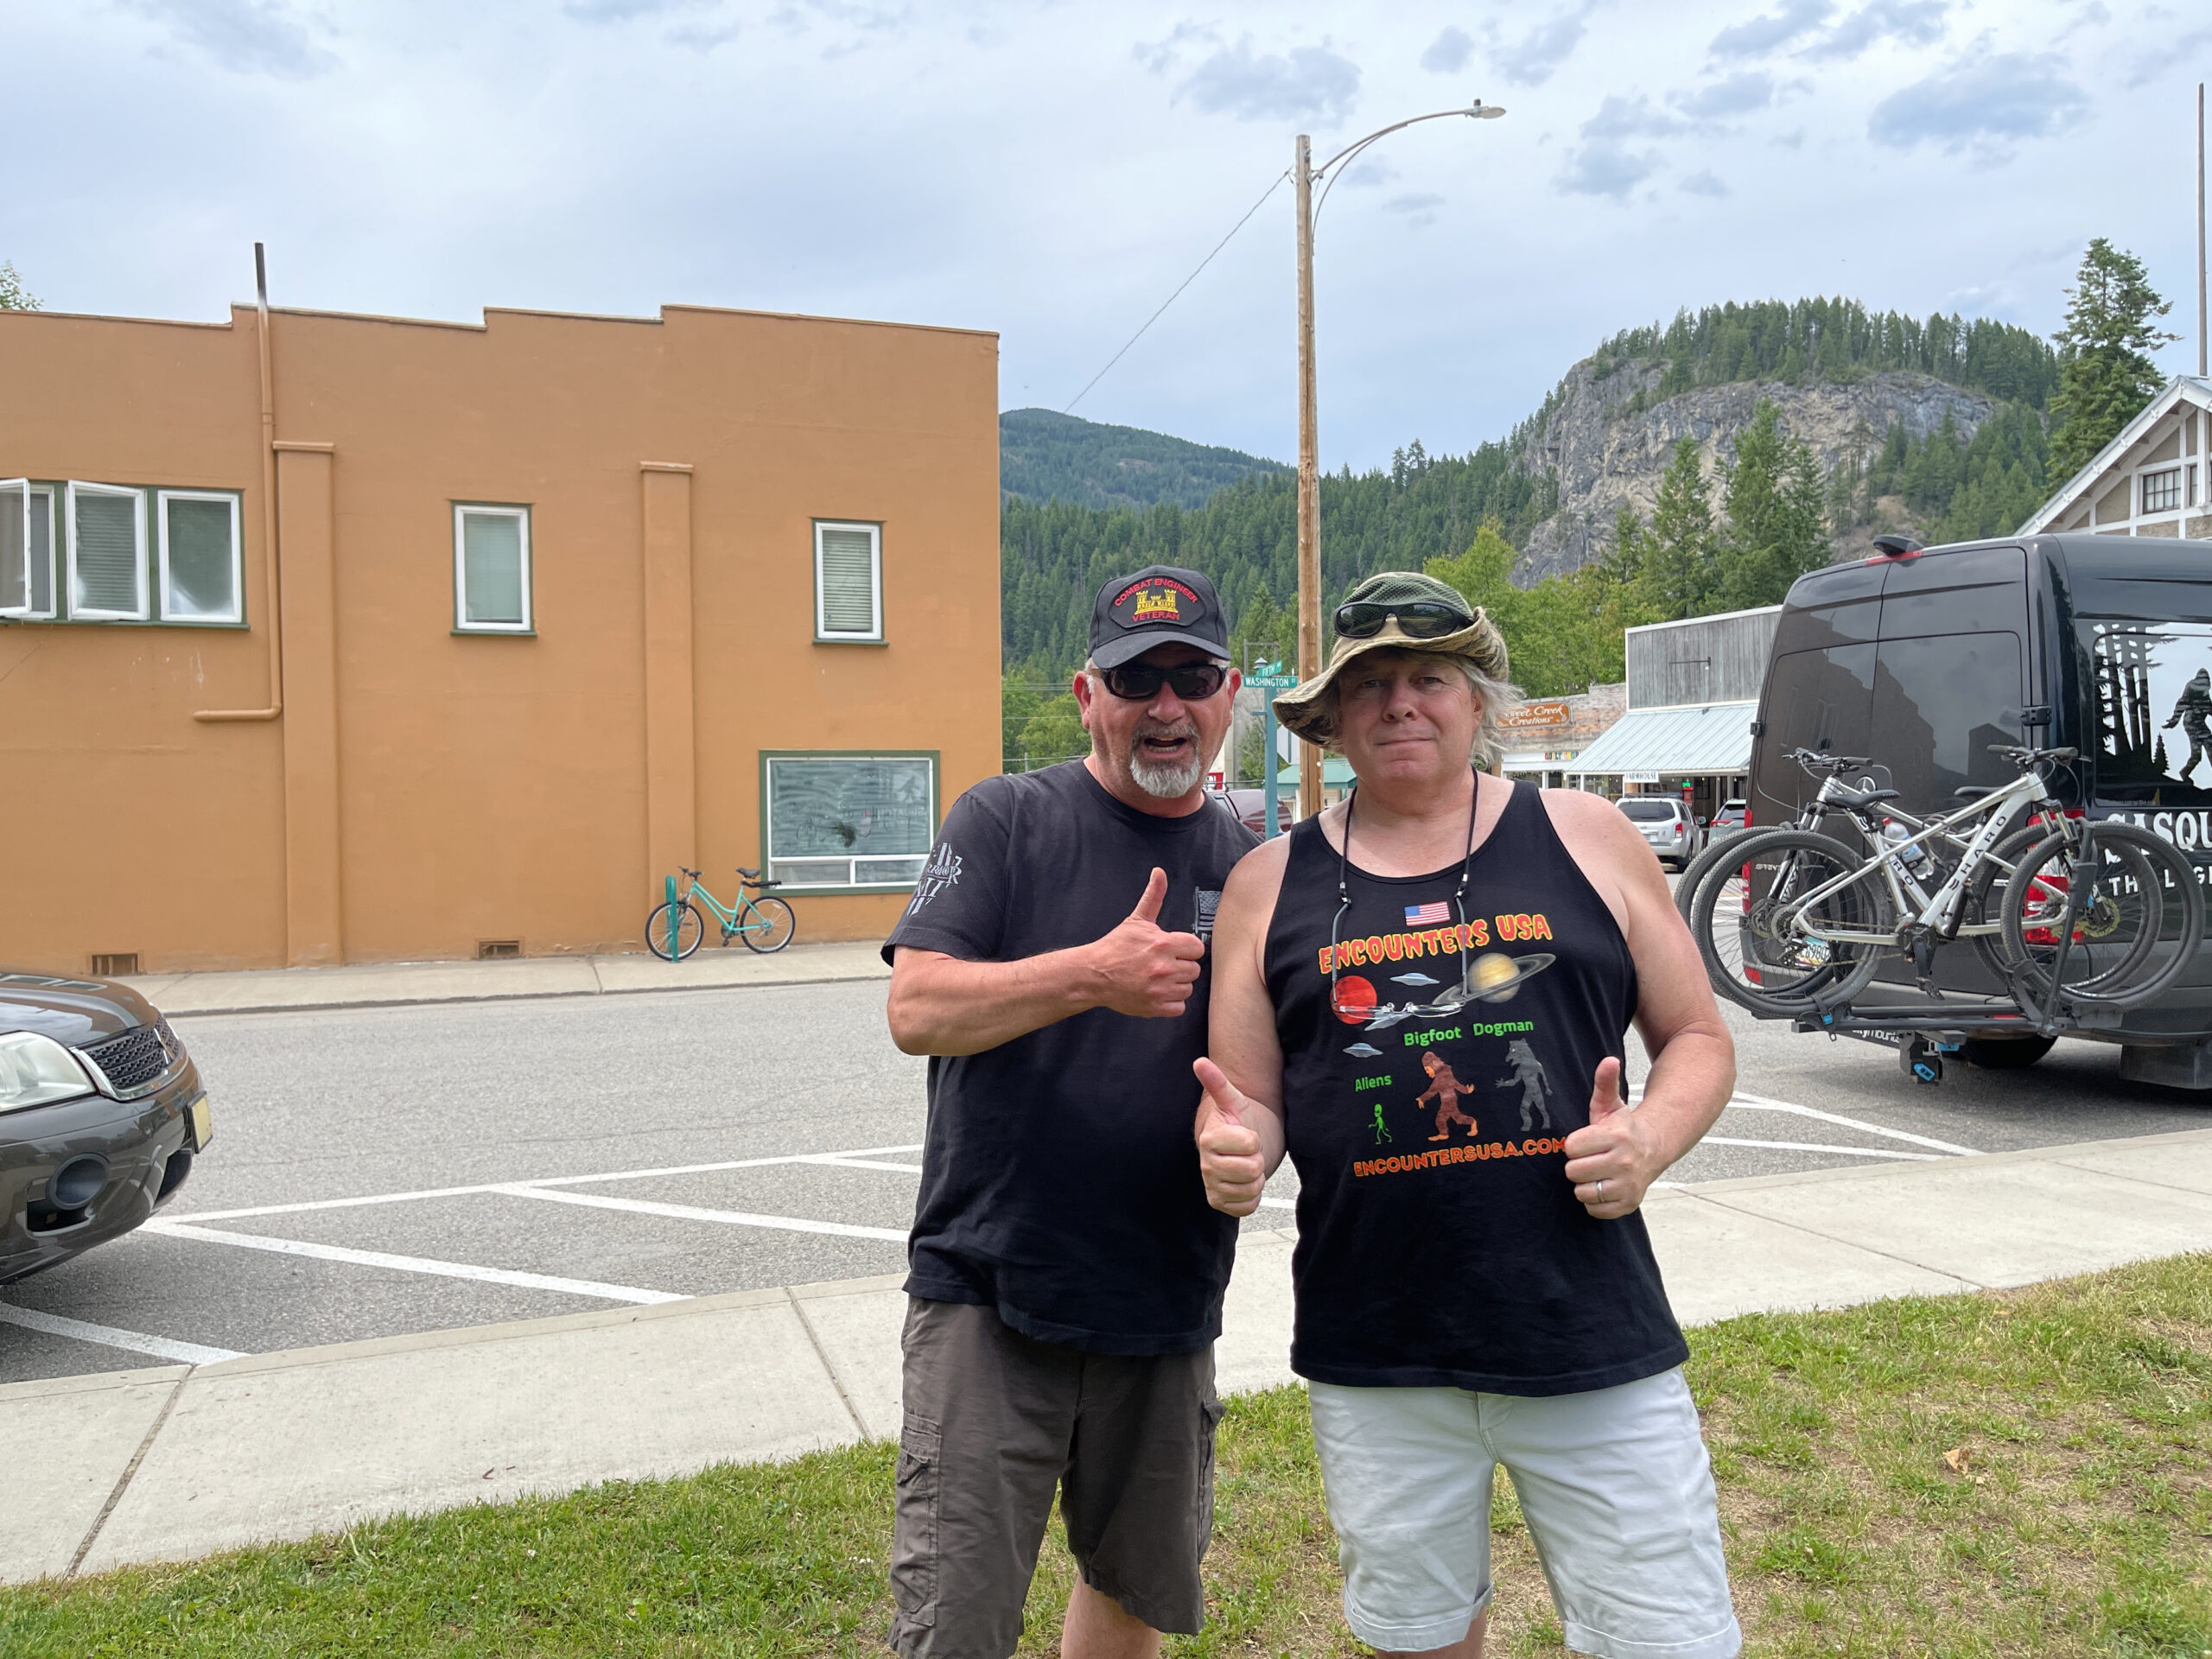 Matthew Heines and Todd Neiss at the Metaline Falls Bigfoot Festival